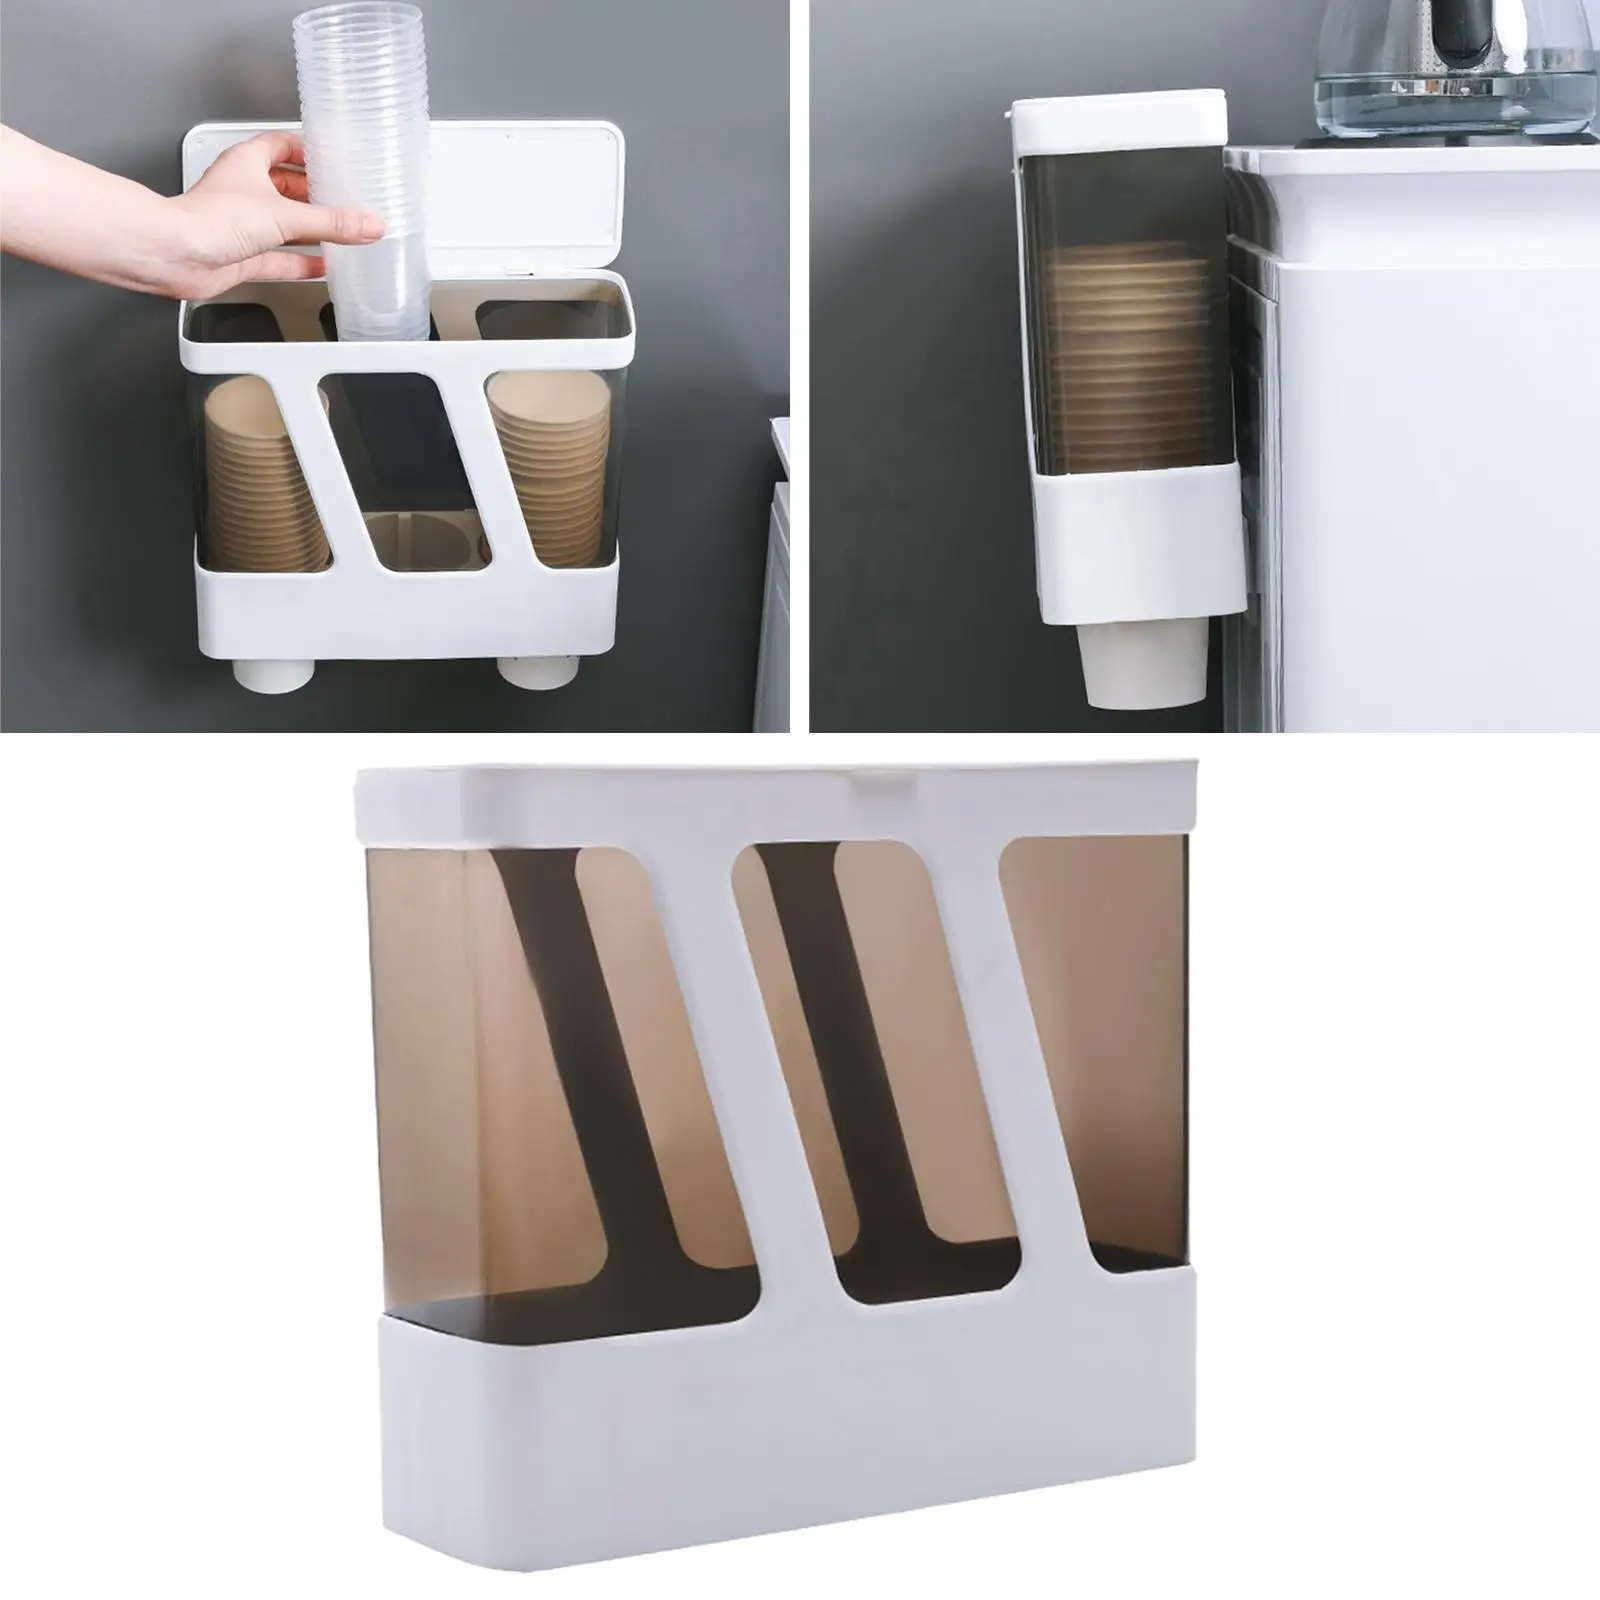 Dustproof Coffee Cup Organizer Countertop Storage Rack 3 Compartments Paper Cup Dispenser for Party Office Halloween Home